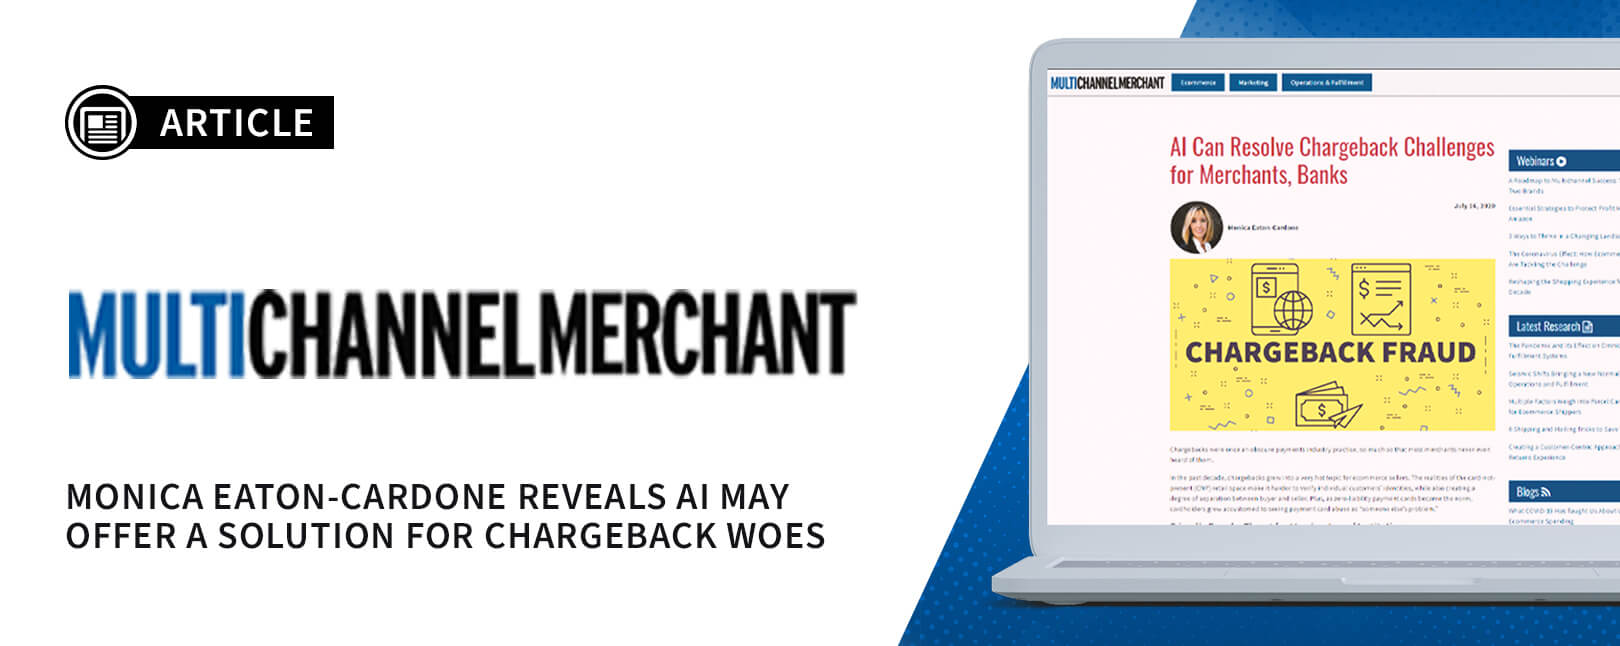 AI Can Resolve Chargeback Challenges for Merchants & Banks